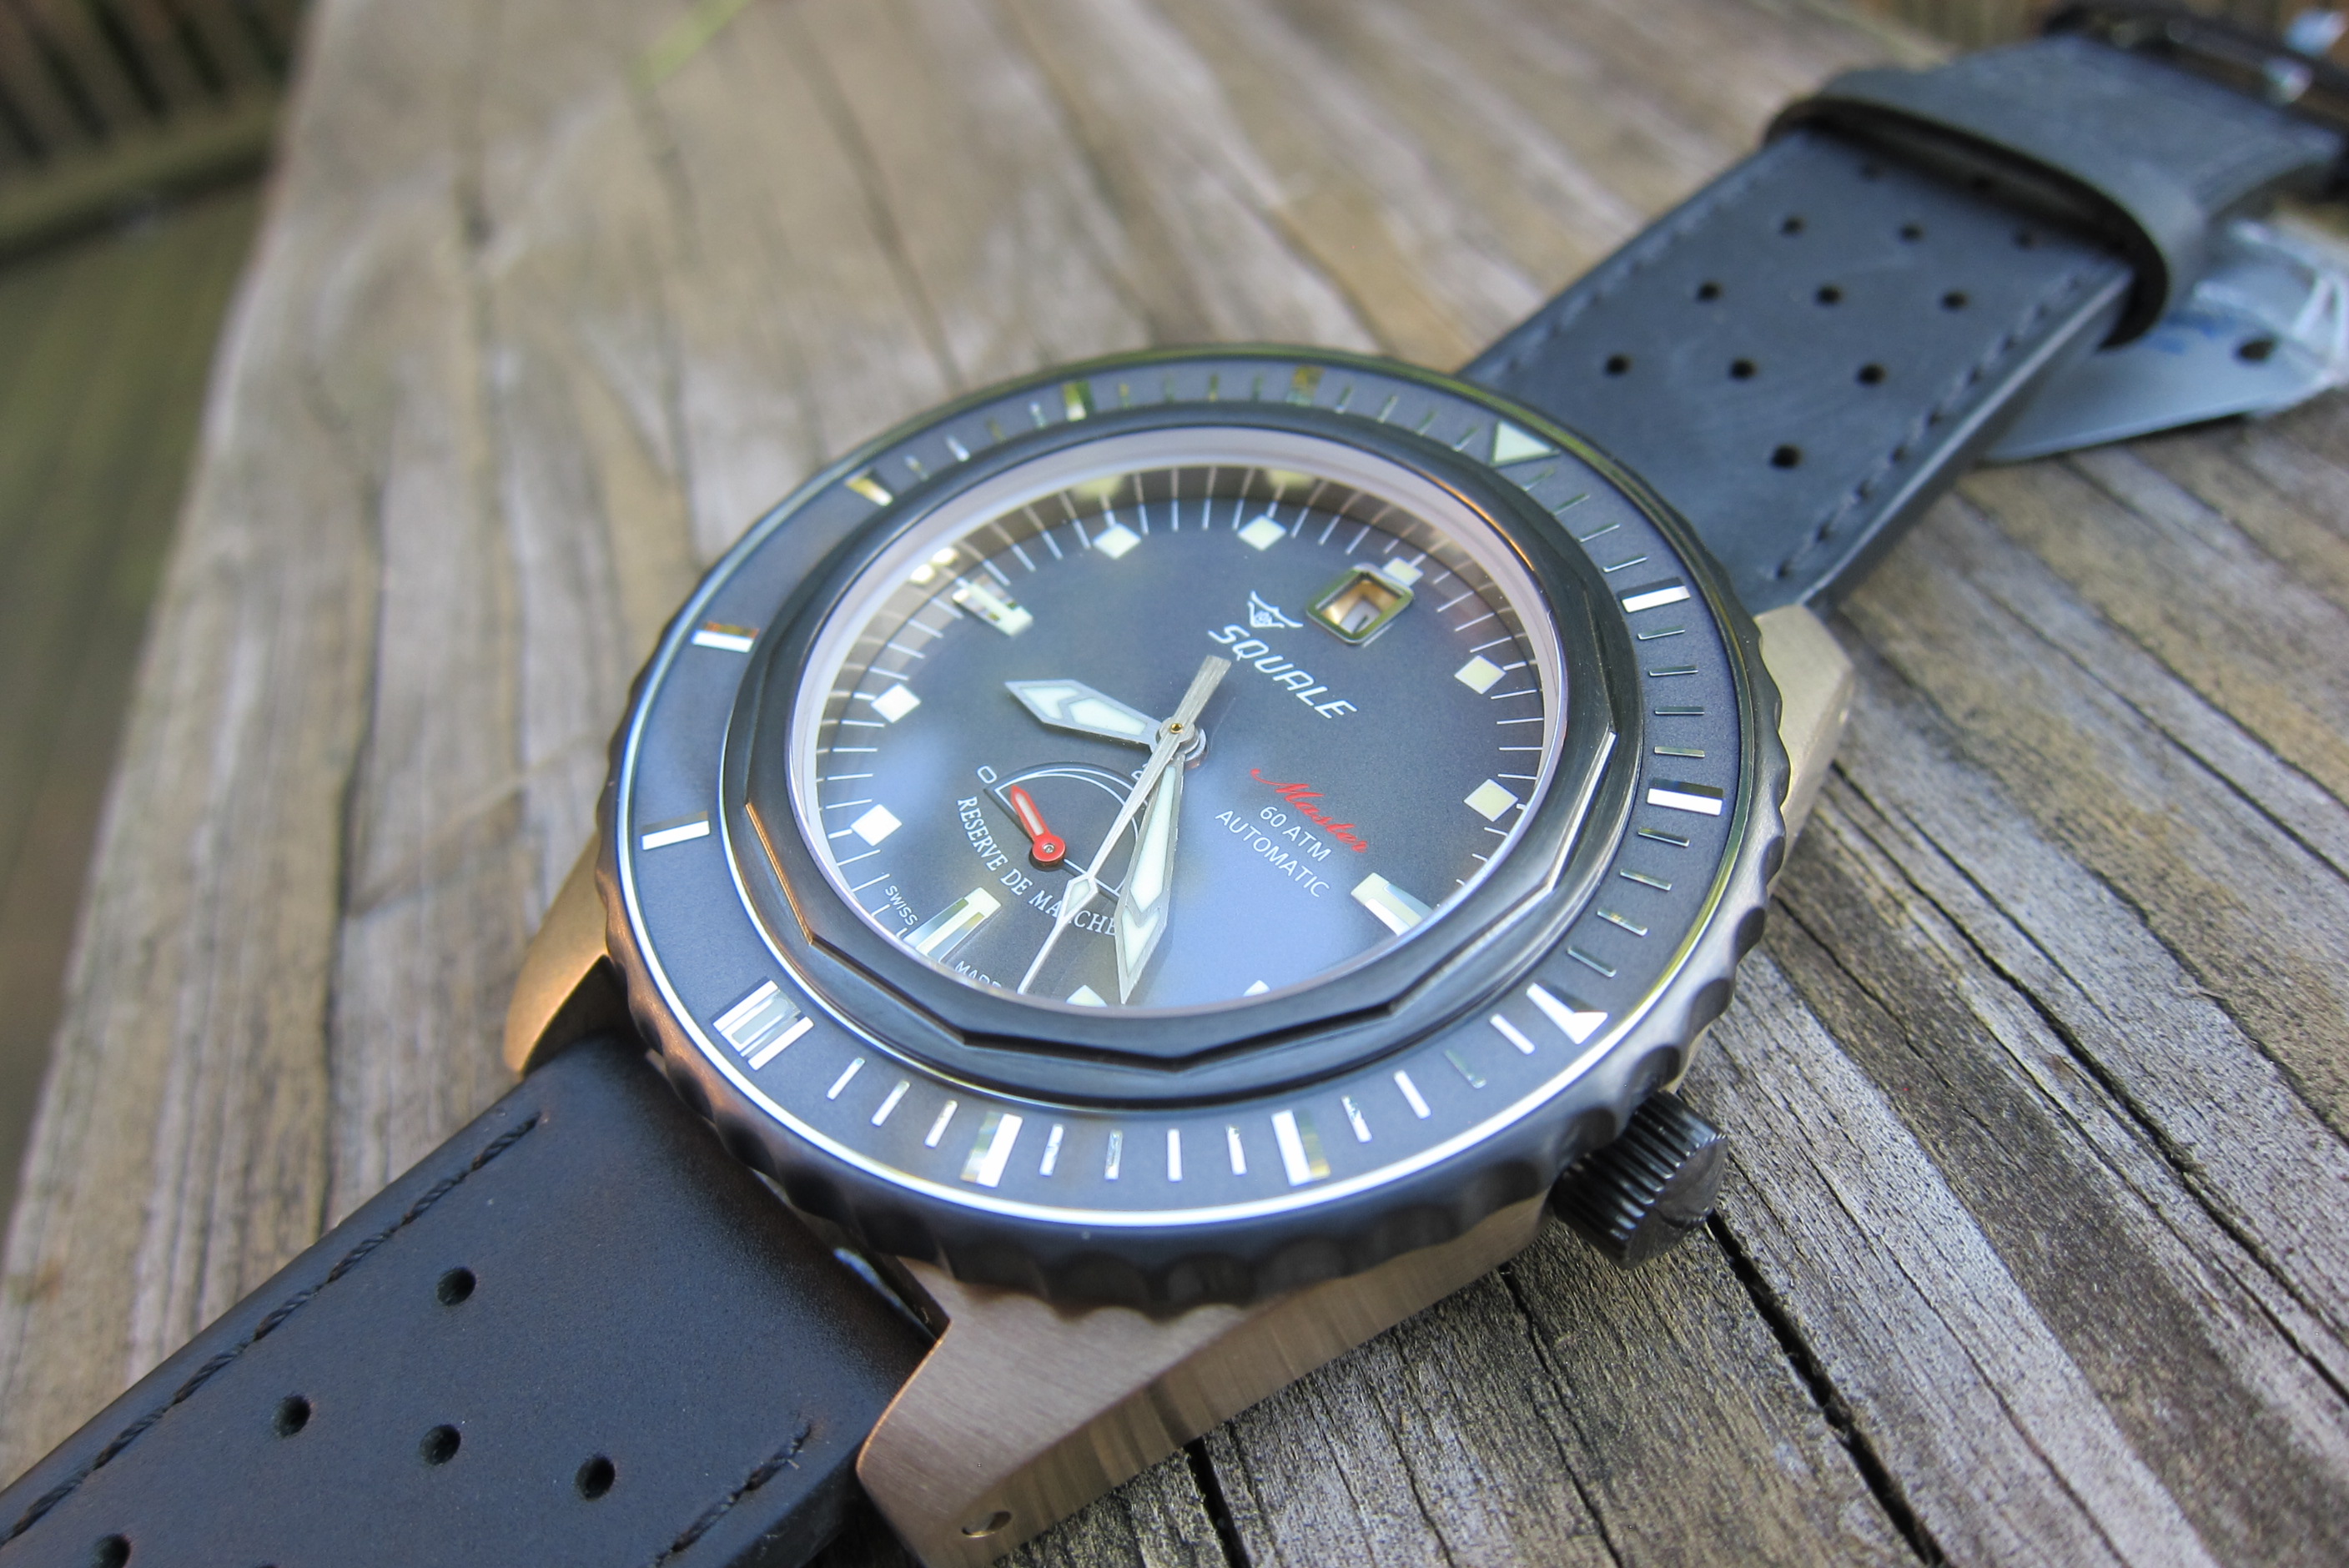 Squale Master in bronze.